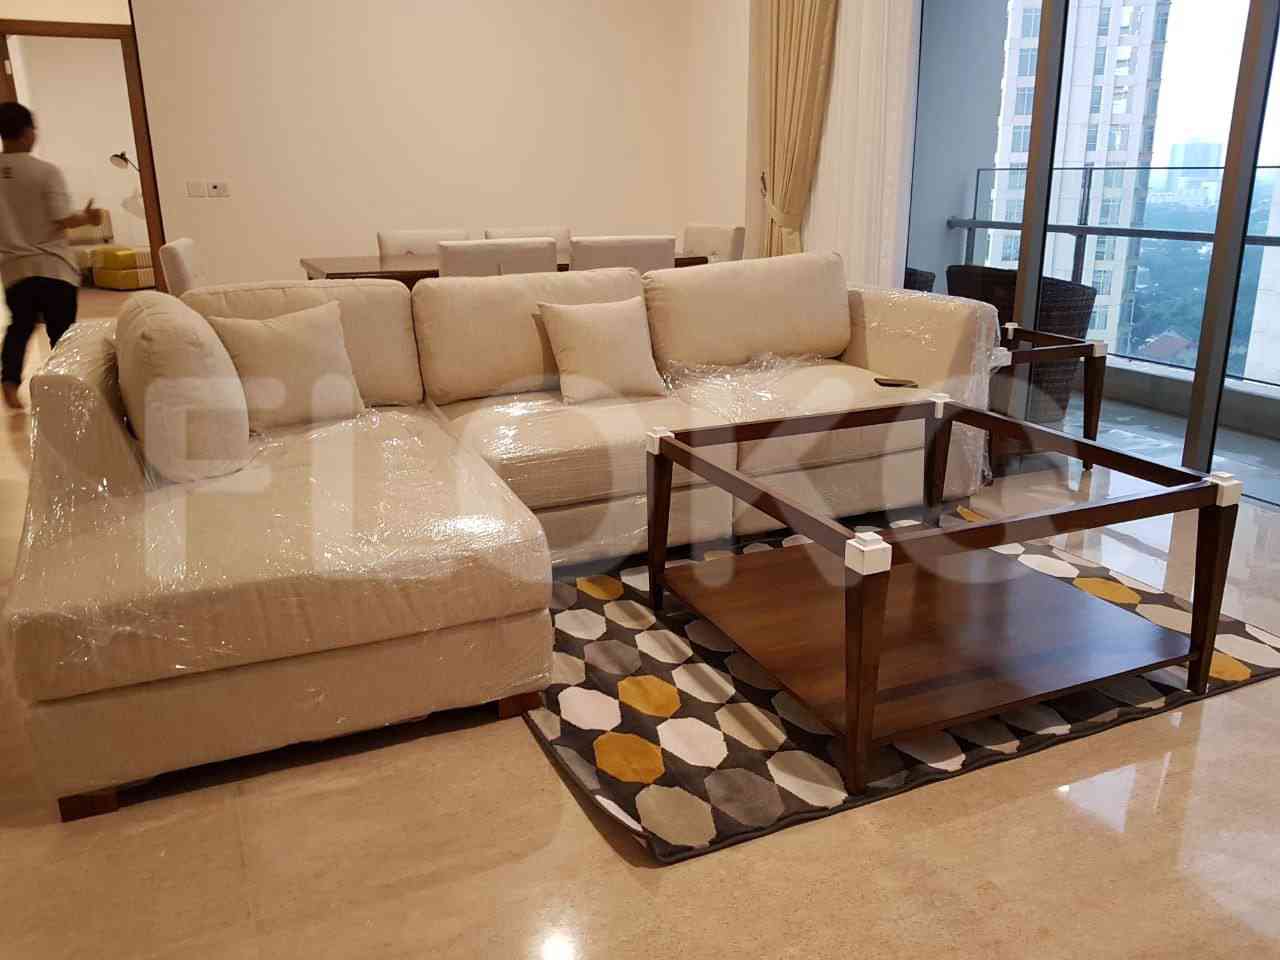 2 Bedroom on 18th Floor for Rent in Pakubuwono Spring Apartment - fga4a1 6